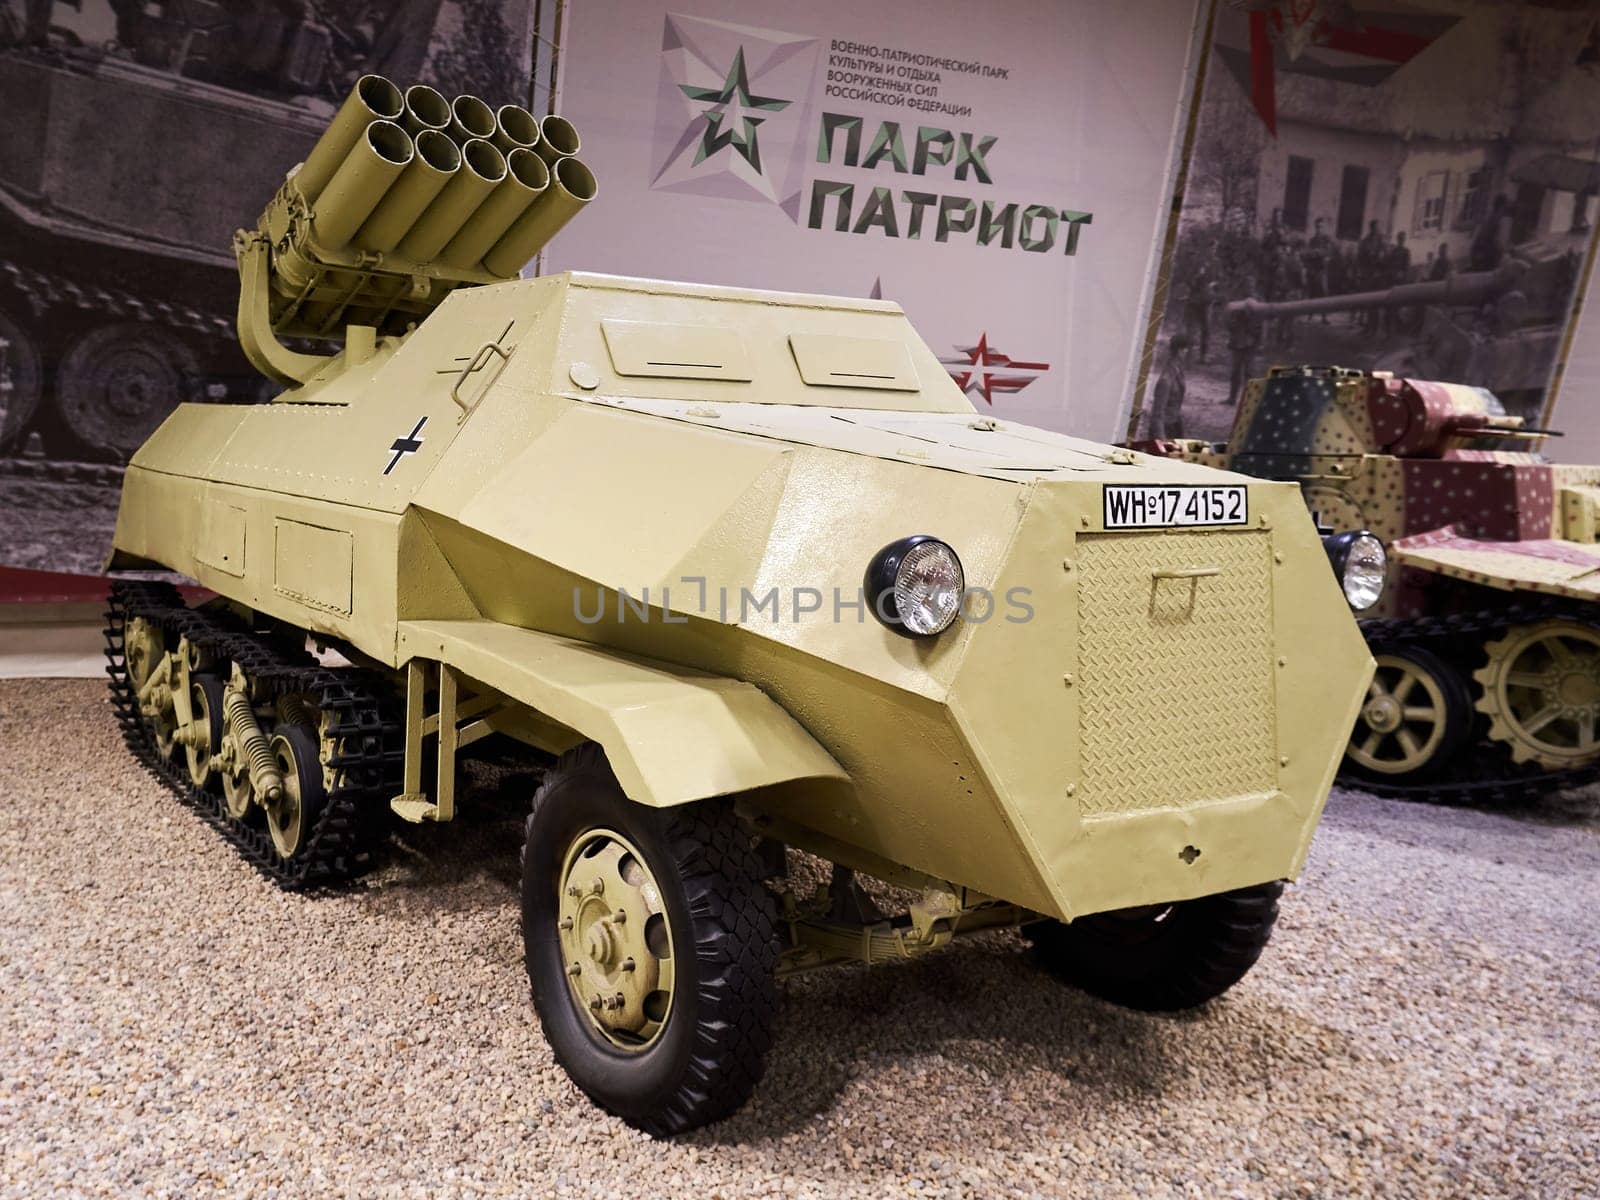 Kubinka, Moscow region, Russia - November 13, 2022: German multiple launch rocket system Panzerwerfer 42. Museum of Tanks and Armored Vehicles in Patriot Park